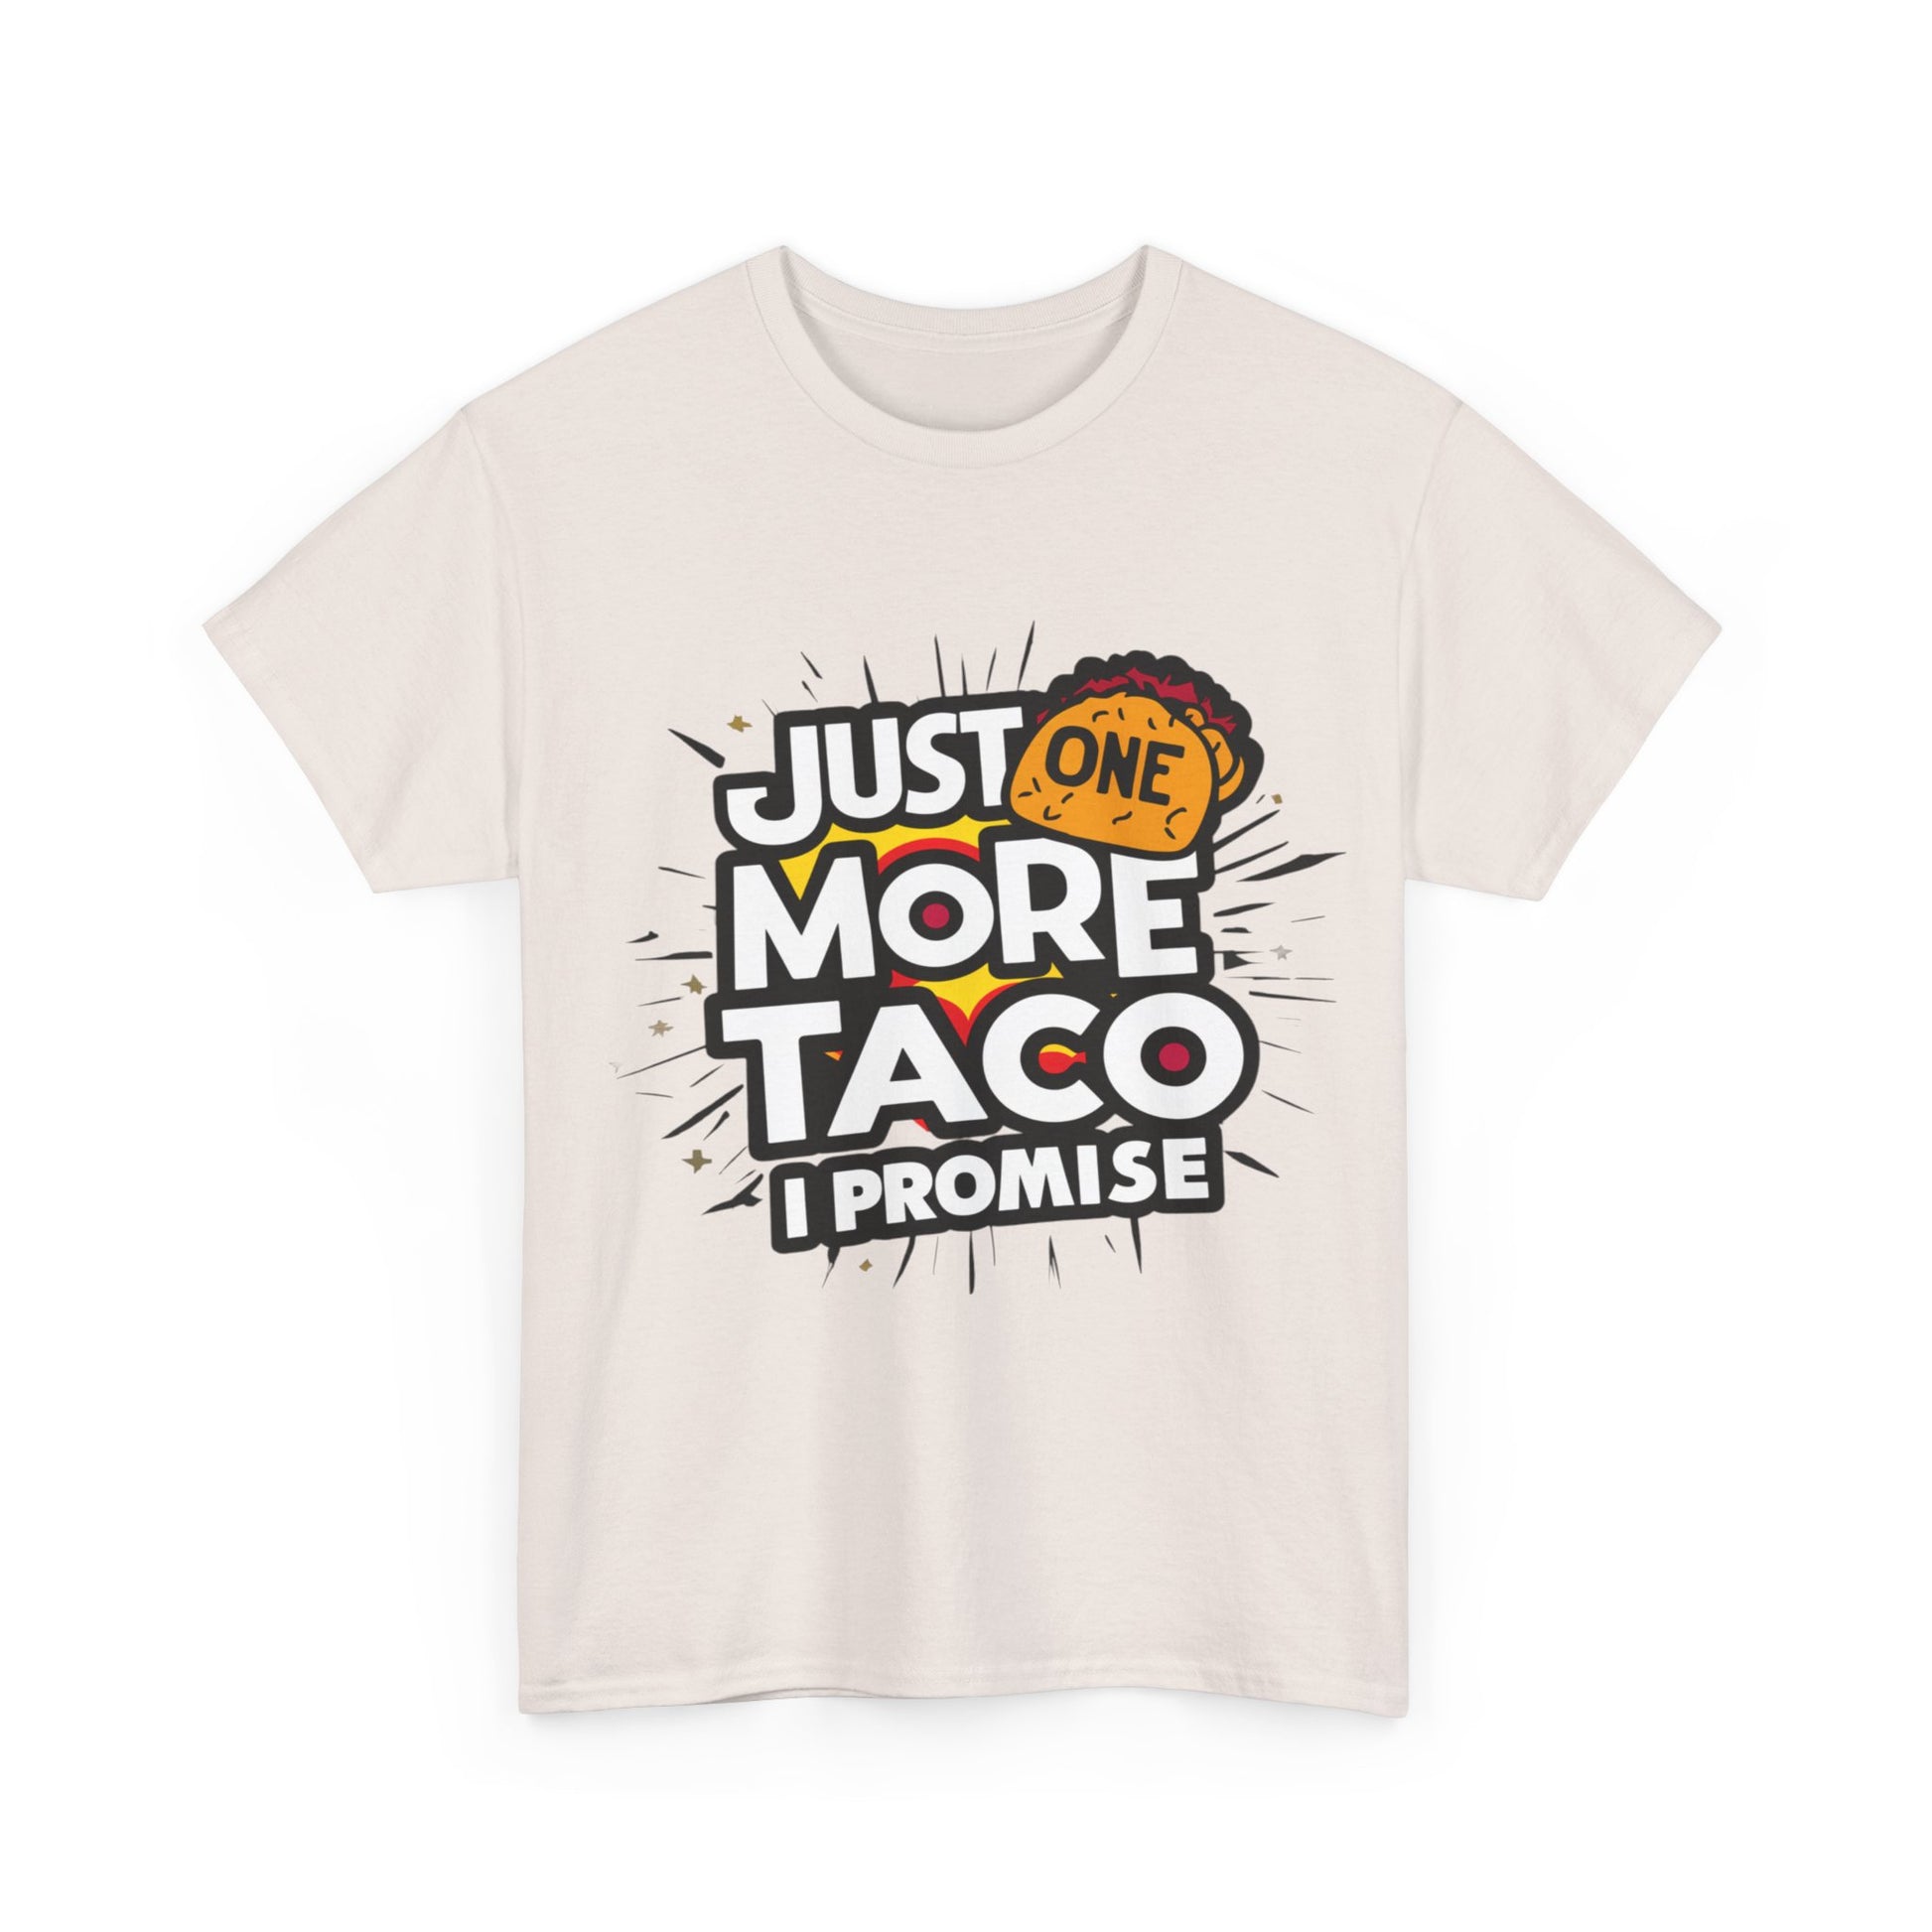 Copy of Just One More Taco I Promise Mexican Food Graphic Unisex Heavy Cotton Tee Cotton Funny Humorous Graphic Soft Premium Unisex Men Women Ice Gray T-shirt Birthday Gift-48